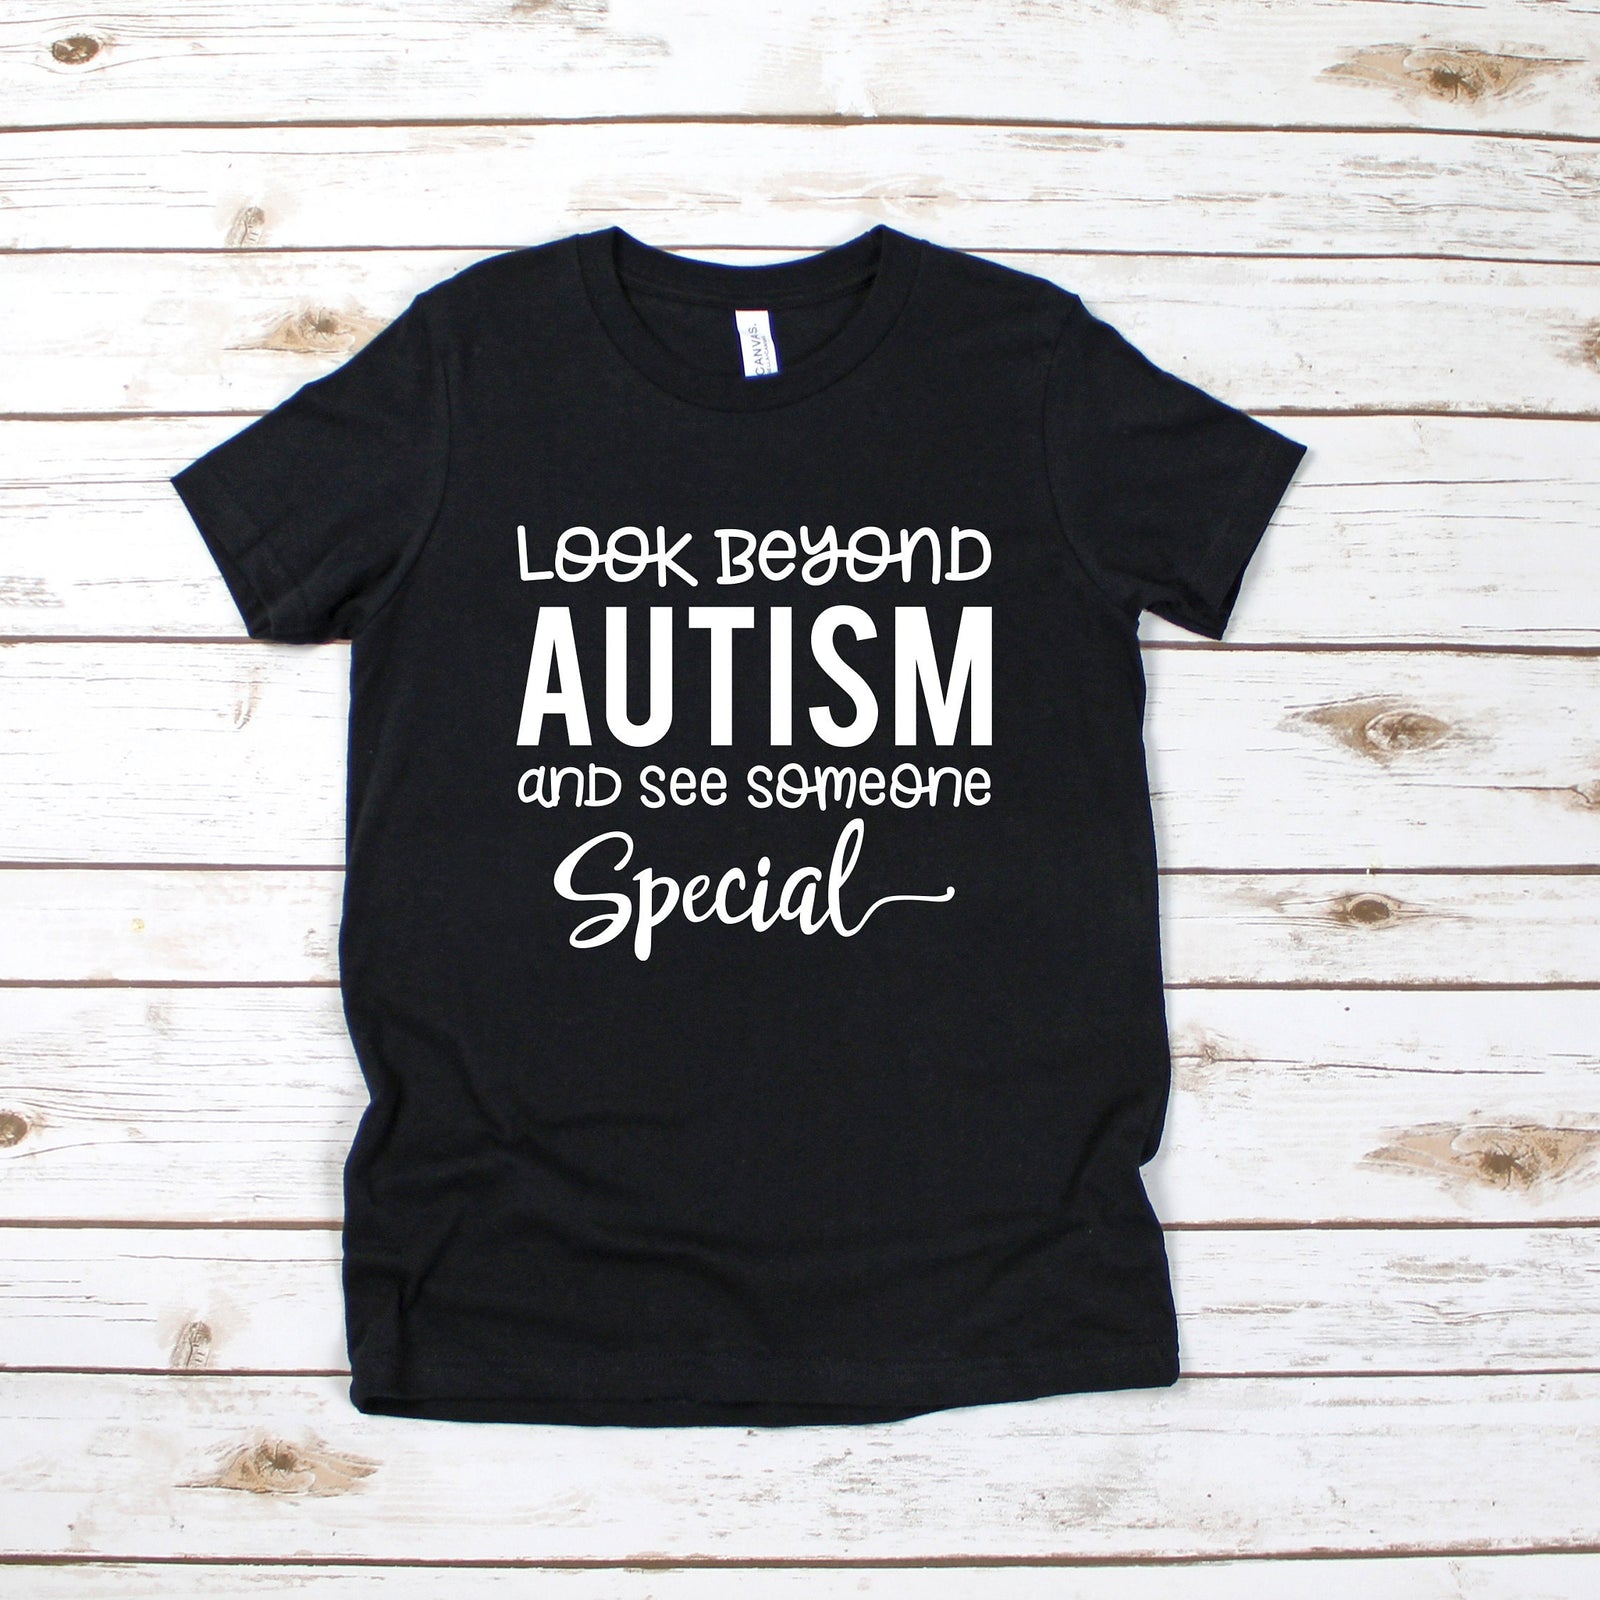 Look Beyond Autism and See Someone Special T Shirt - Kids Autism Awareness Shirt - Children Inclusion Autism Awareness Shirt